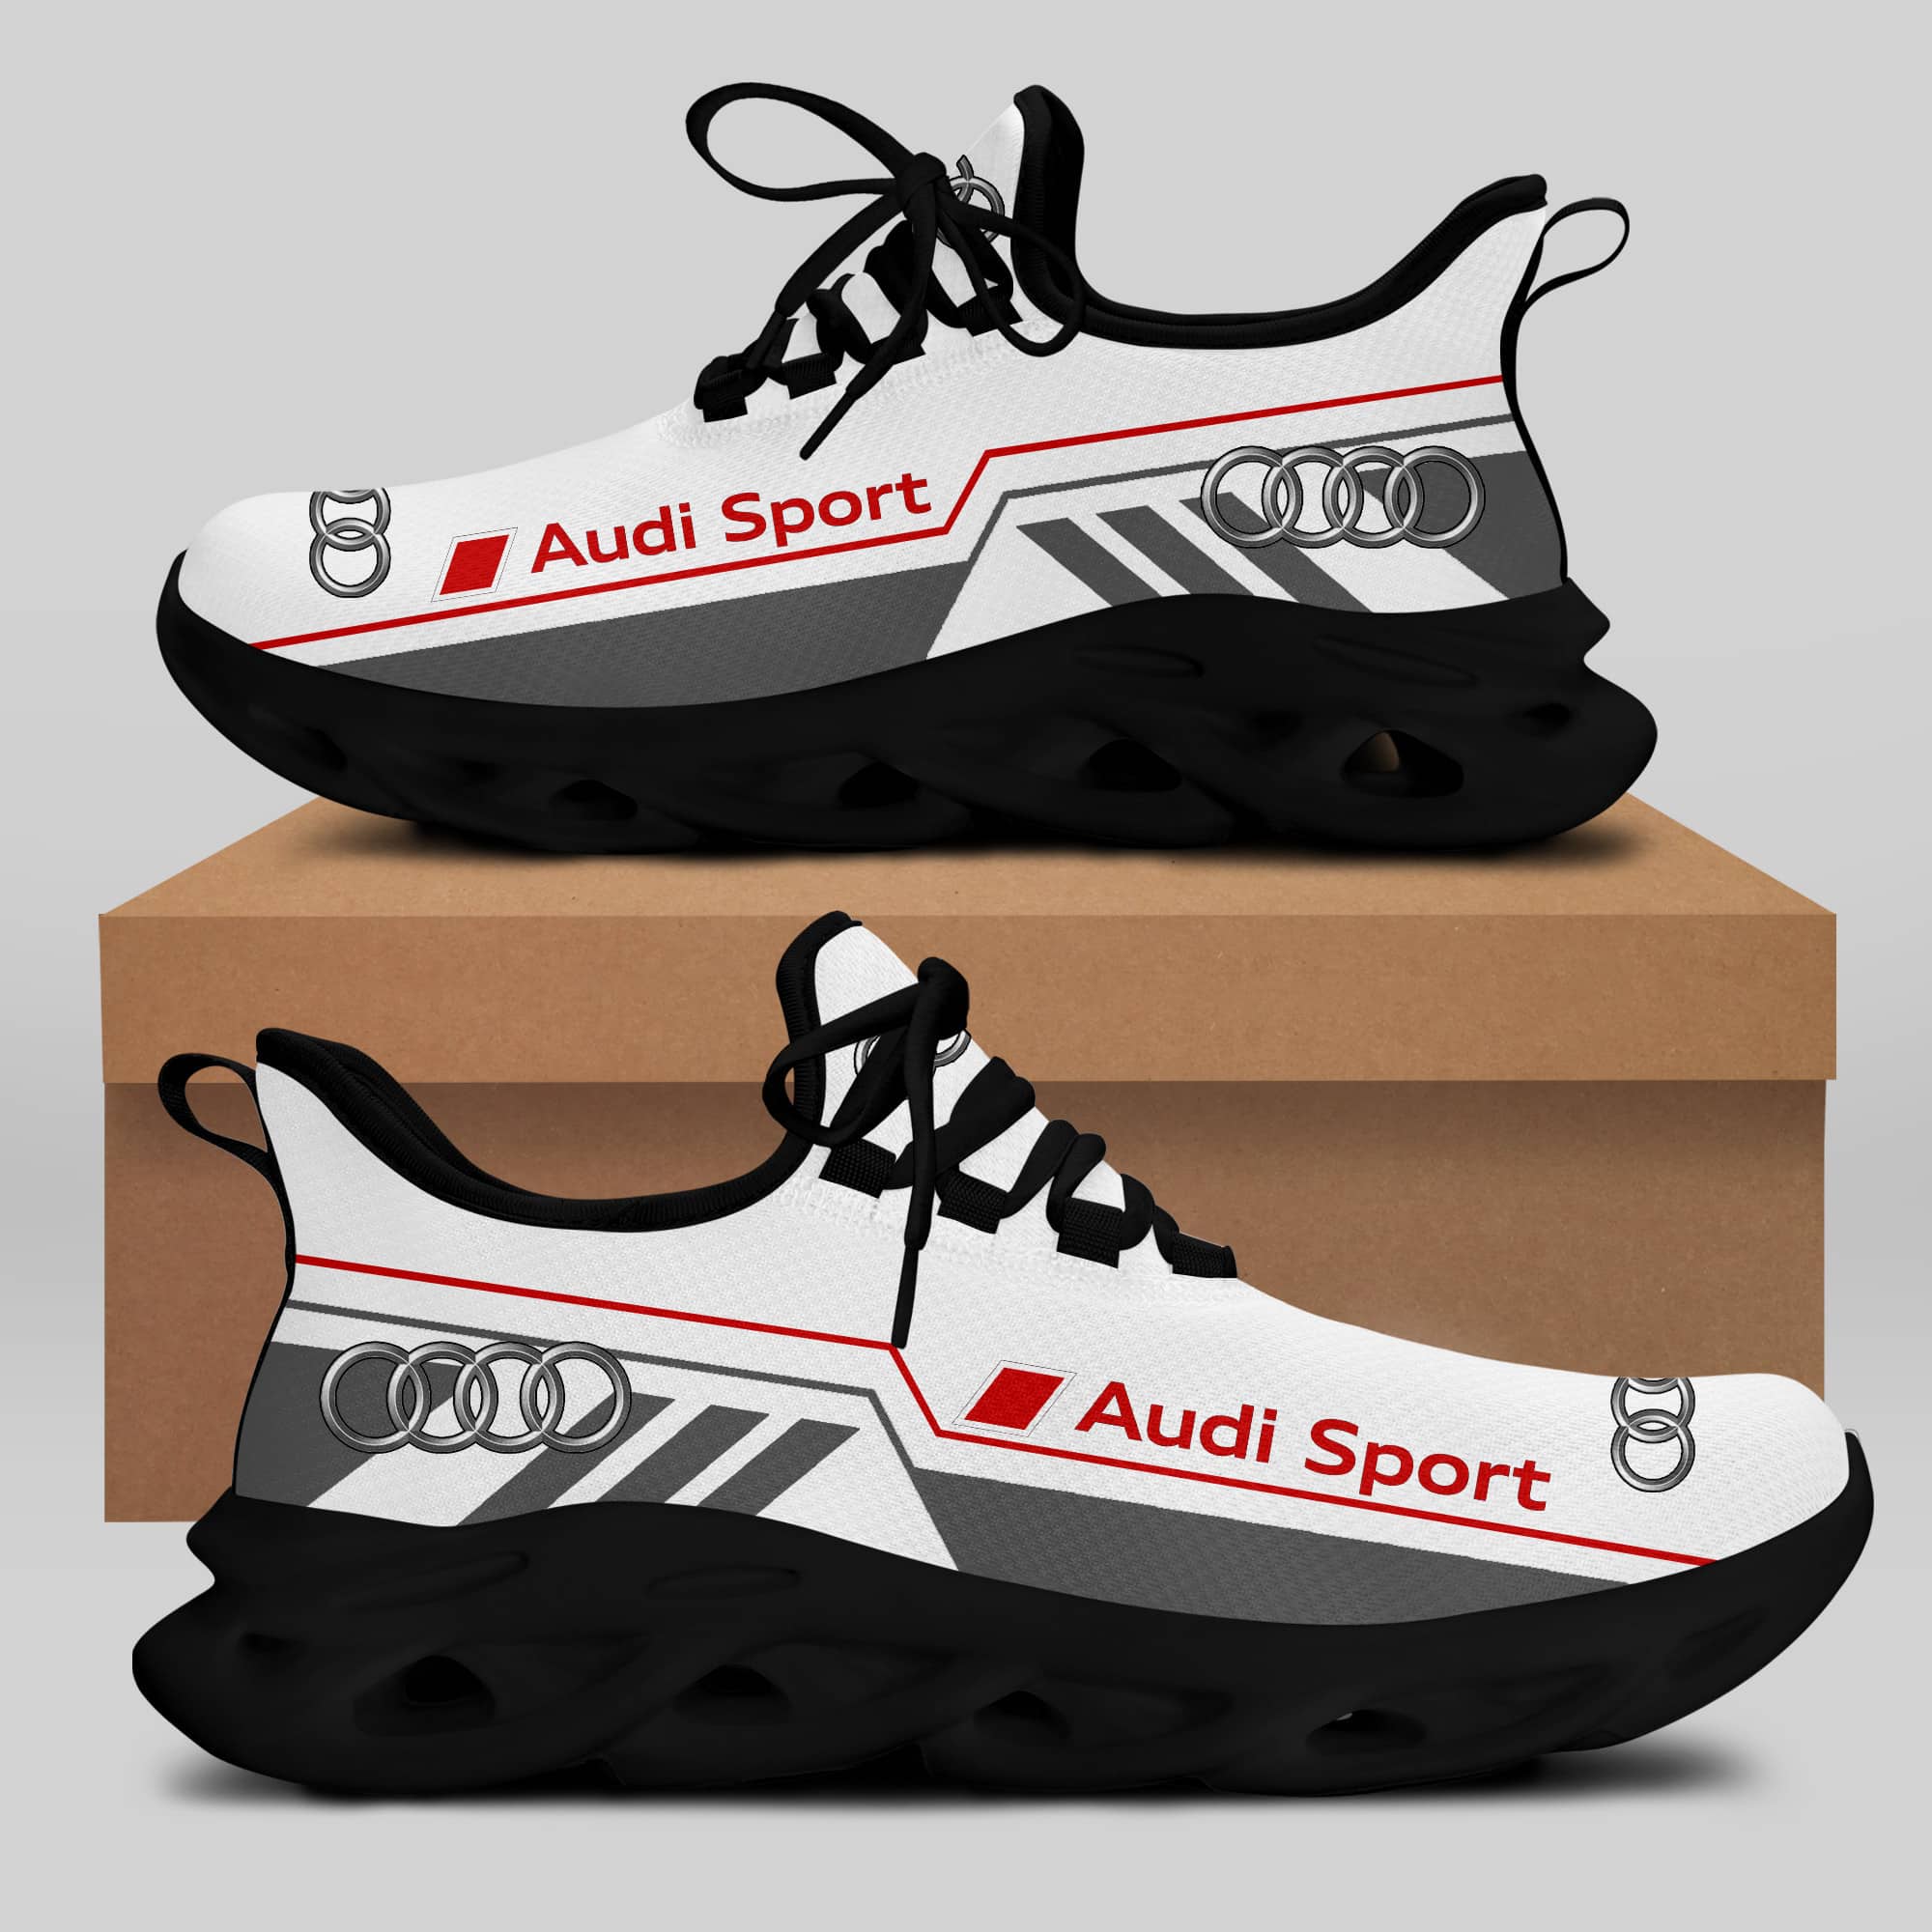 Audi Sport Running Shoes Max Soul Shoes Sneakers Ver 20 2